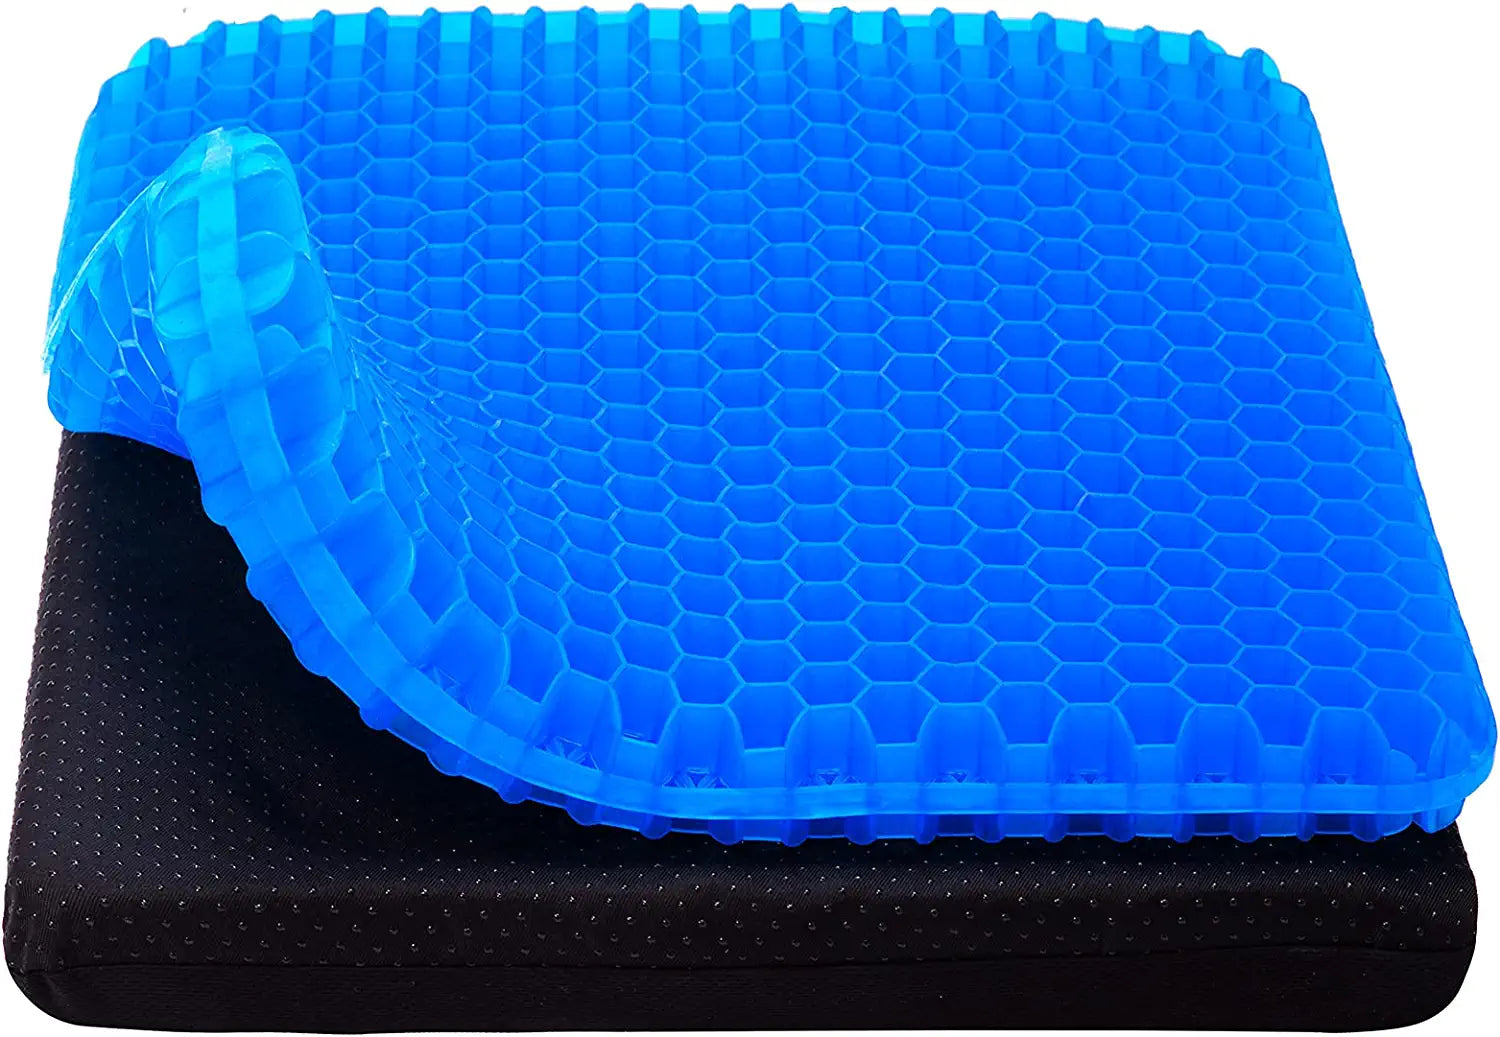 Gel Seat Cushion for Long Sitting - Double Thick Gel Chair Cushion